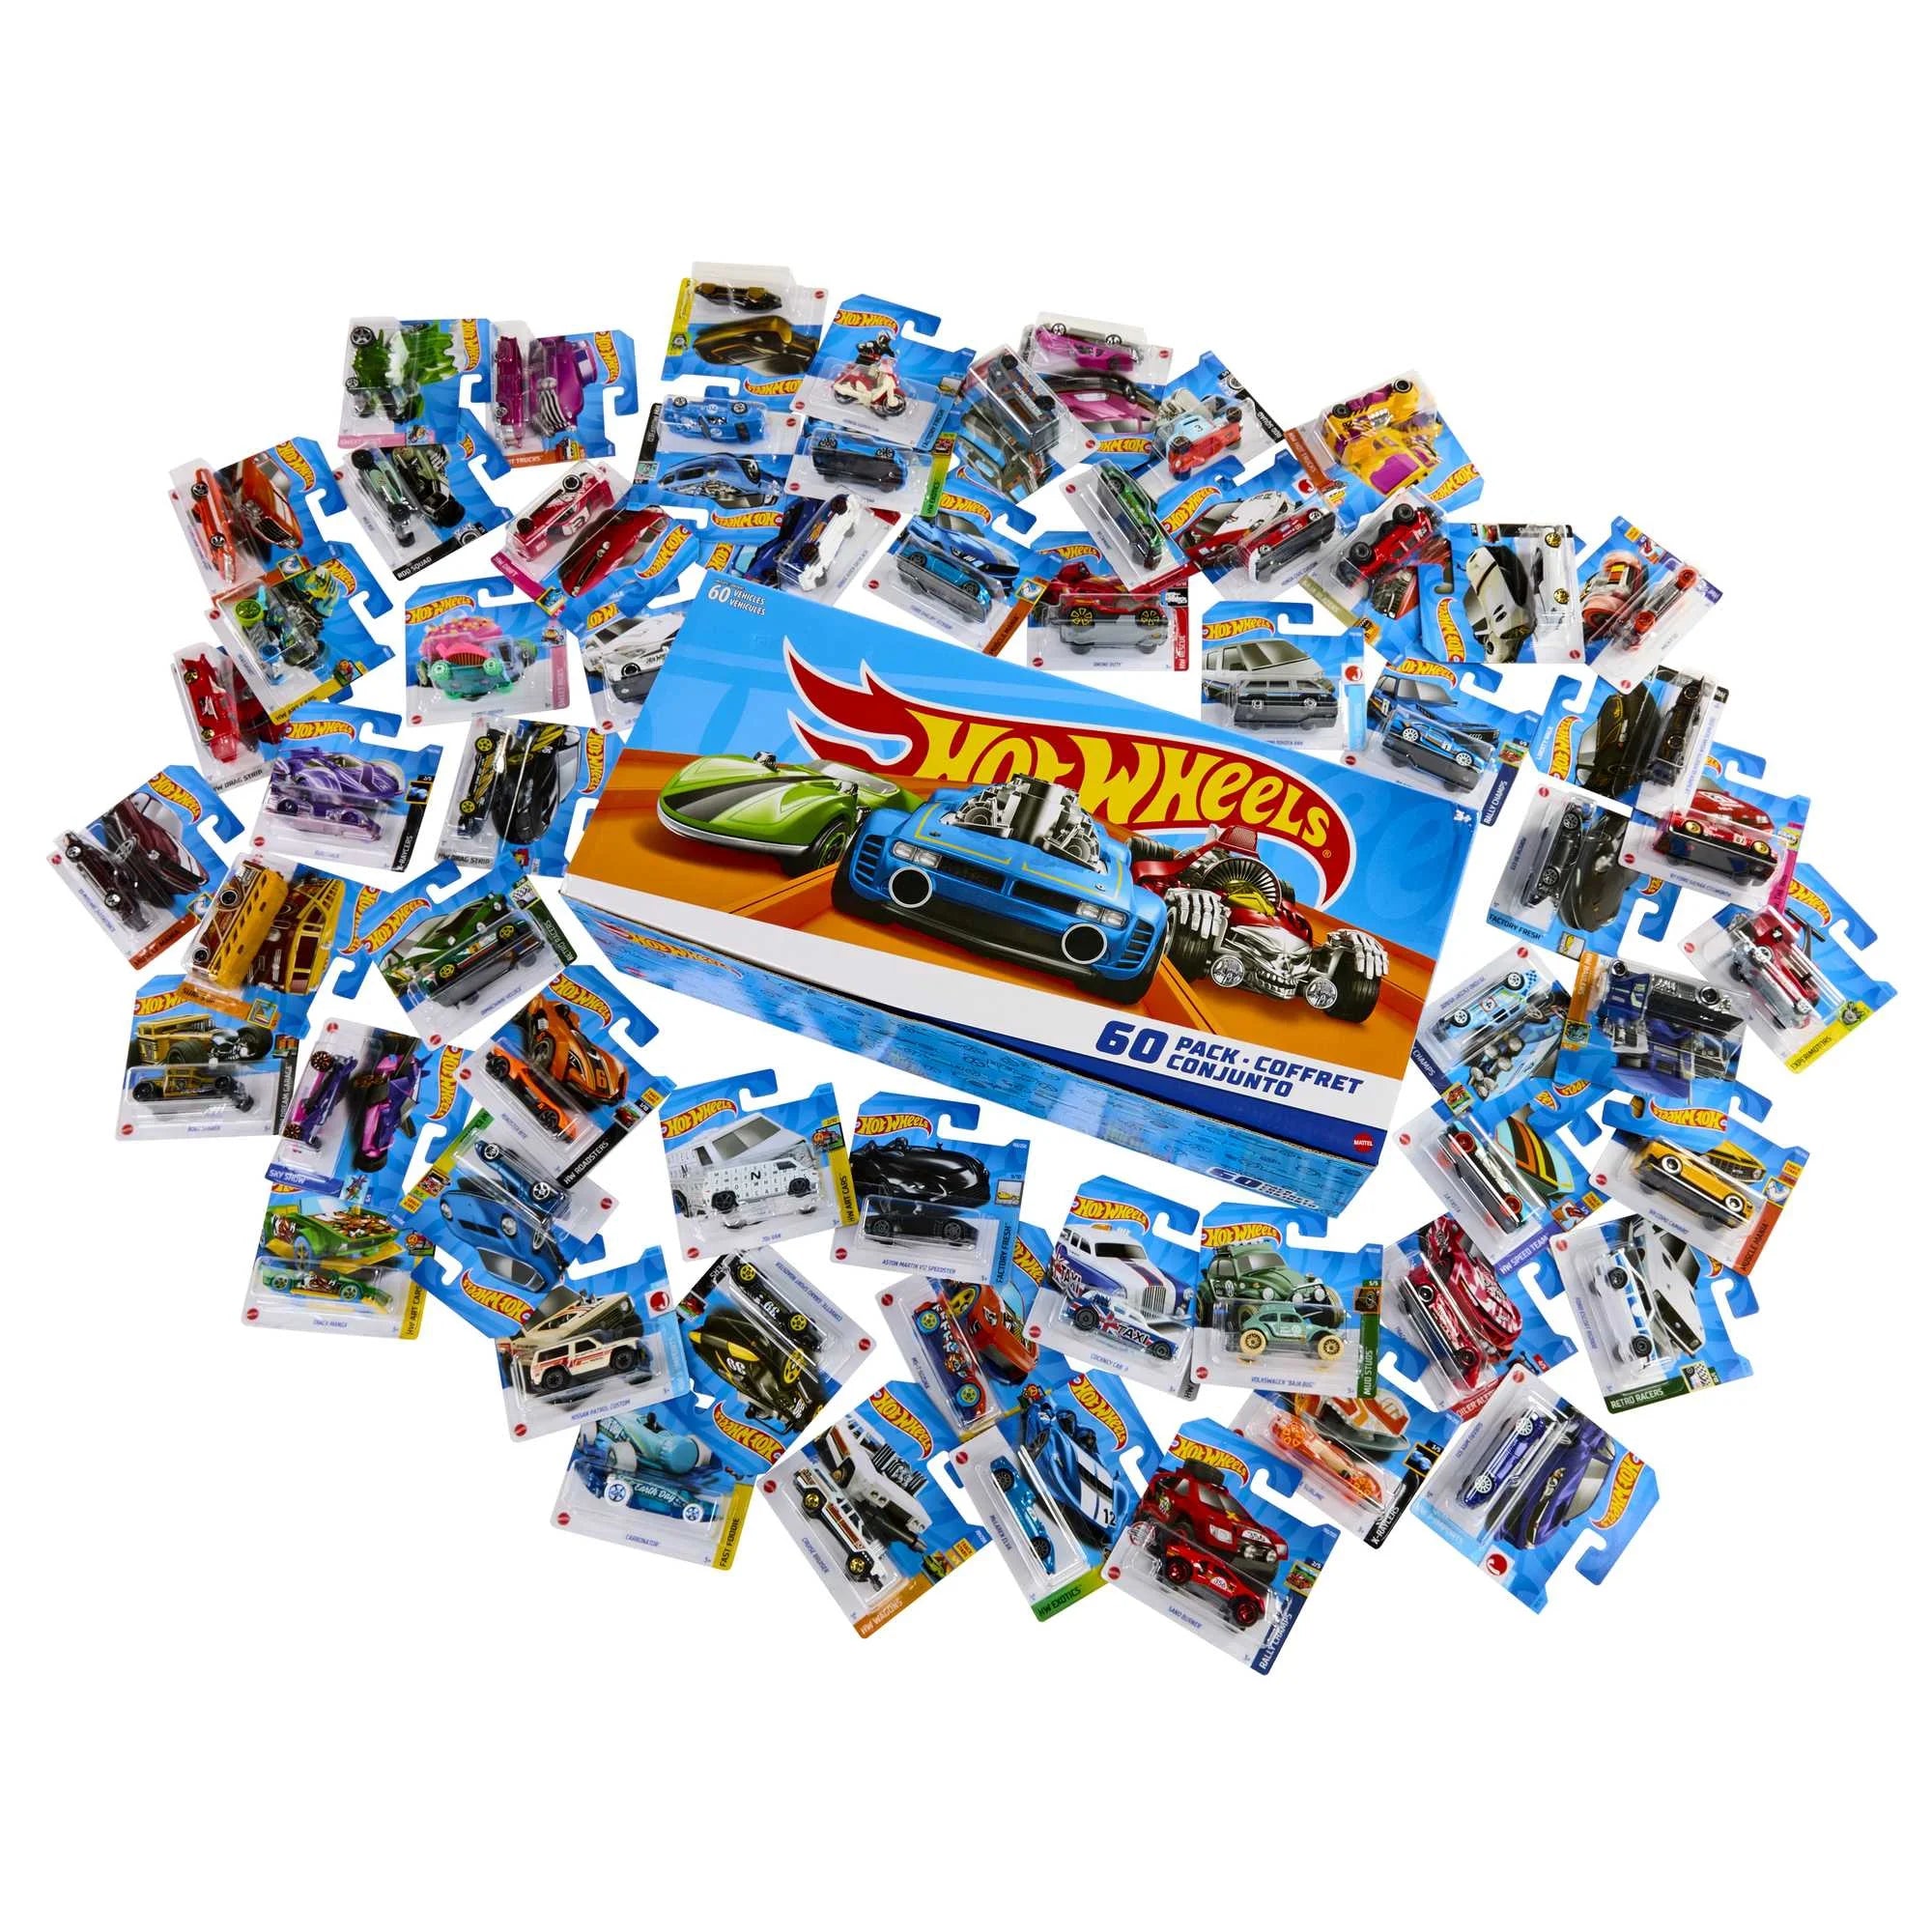 60 Hot Wheels Collectible Toy Cars or Trucks